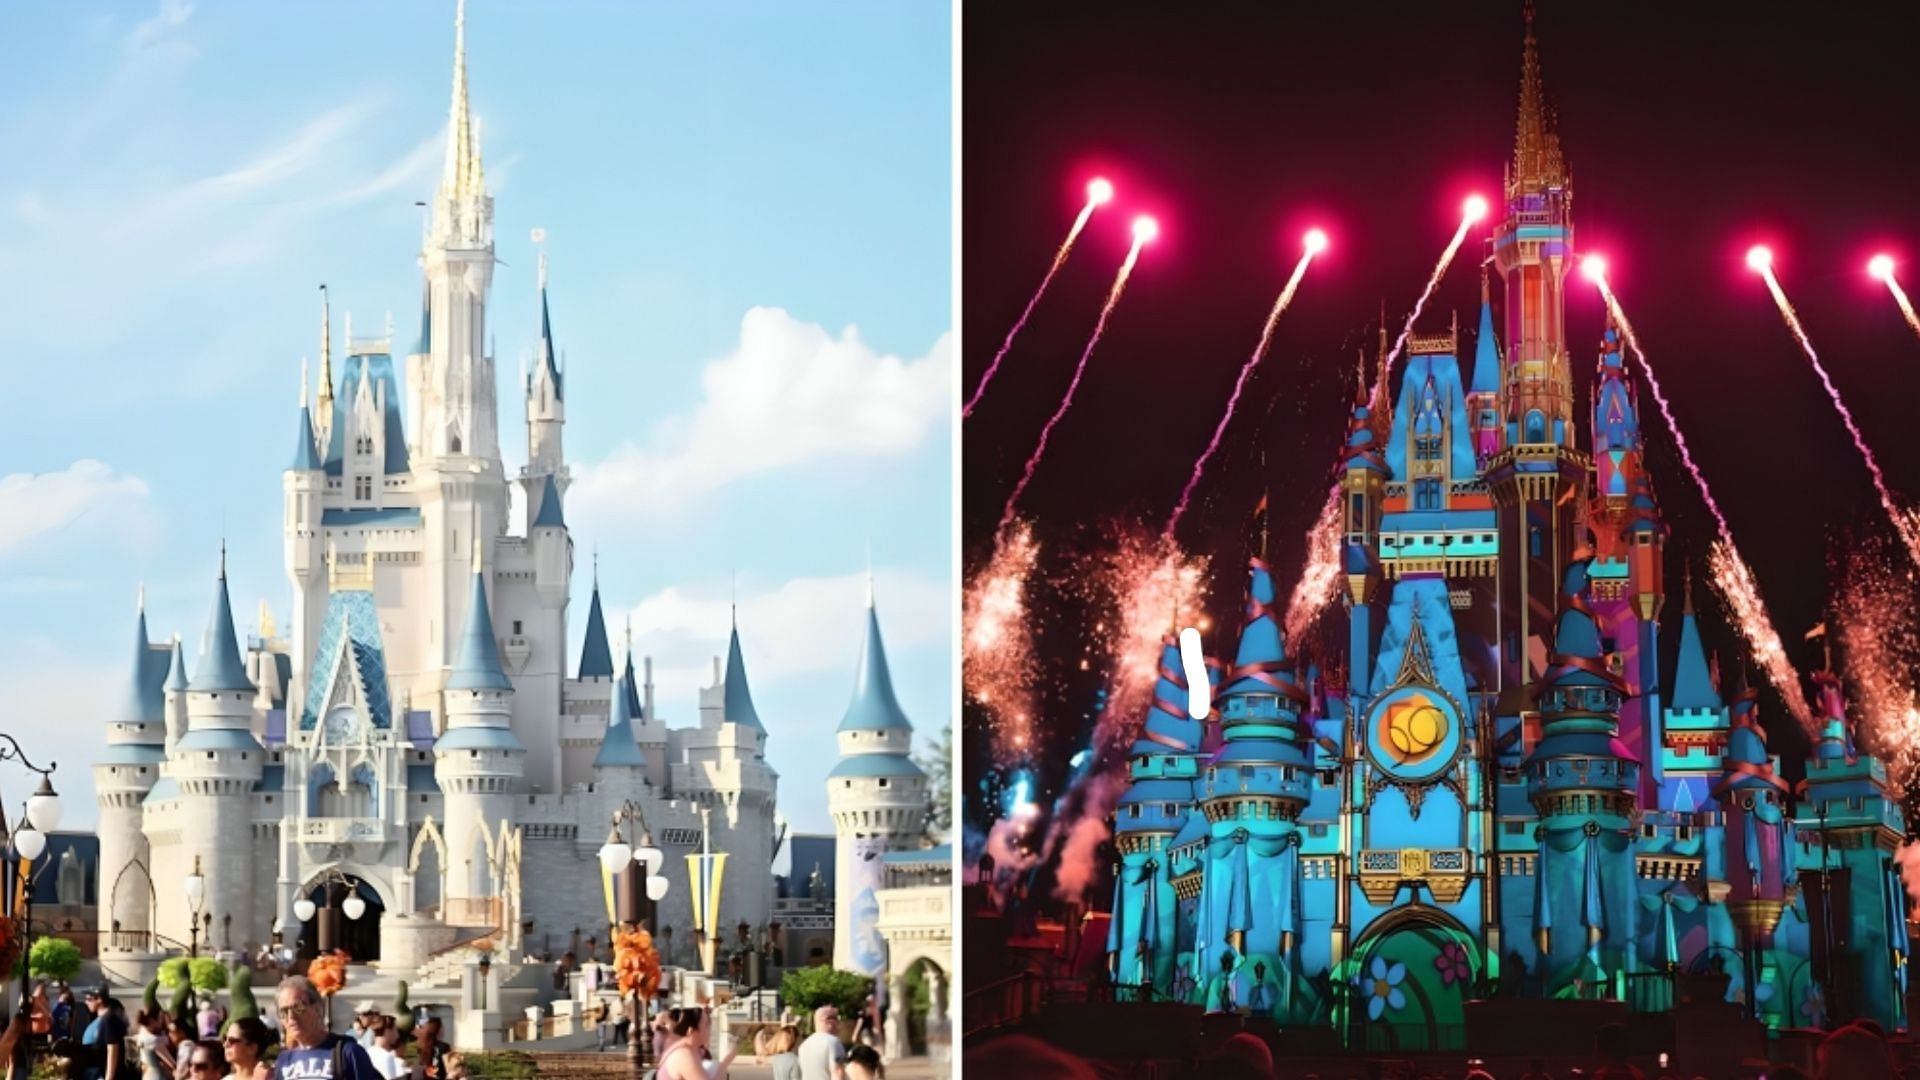 The rumor of Disney World&rsquo;s Cinderella Castle being burned down is false (Images via Pexels/Leah Newhouse and juan mendez)